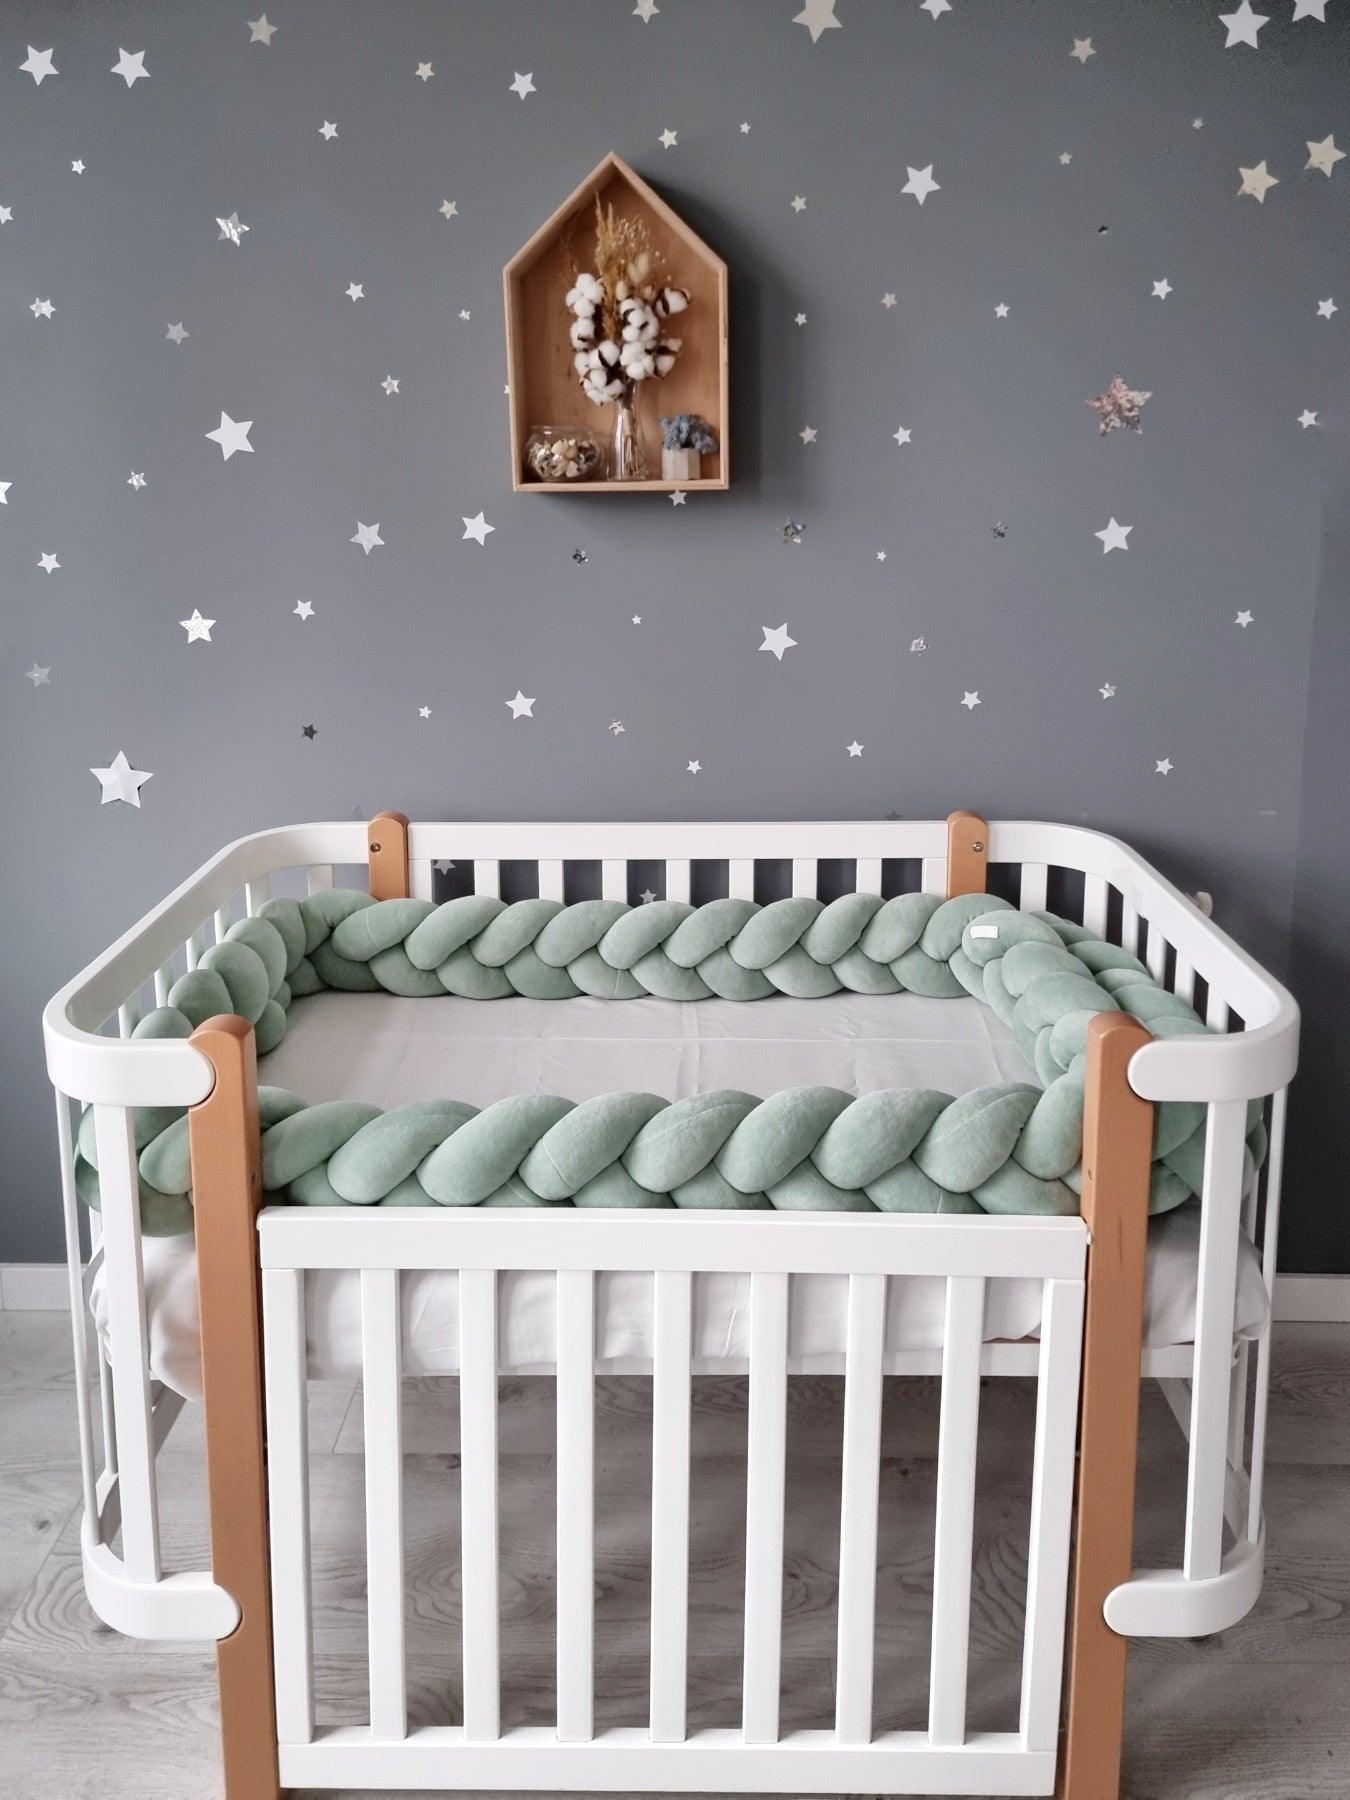 Grey cot bumper of 60x120cm (for DIEM cot) from Carezza collection